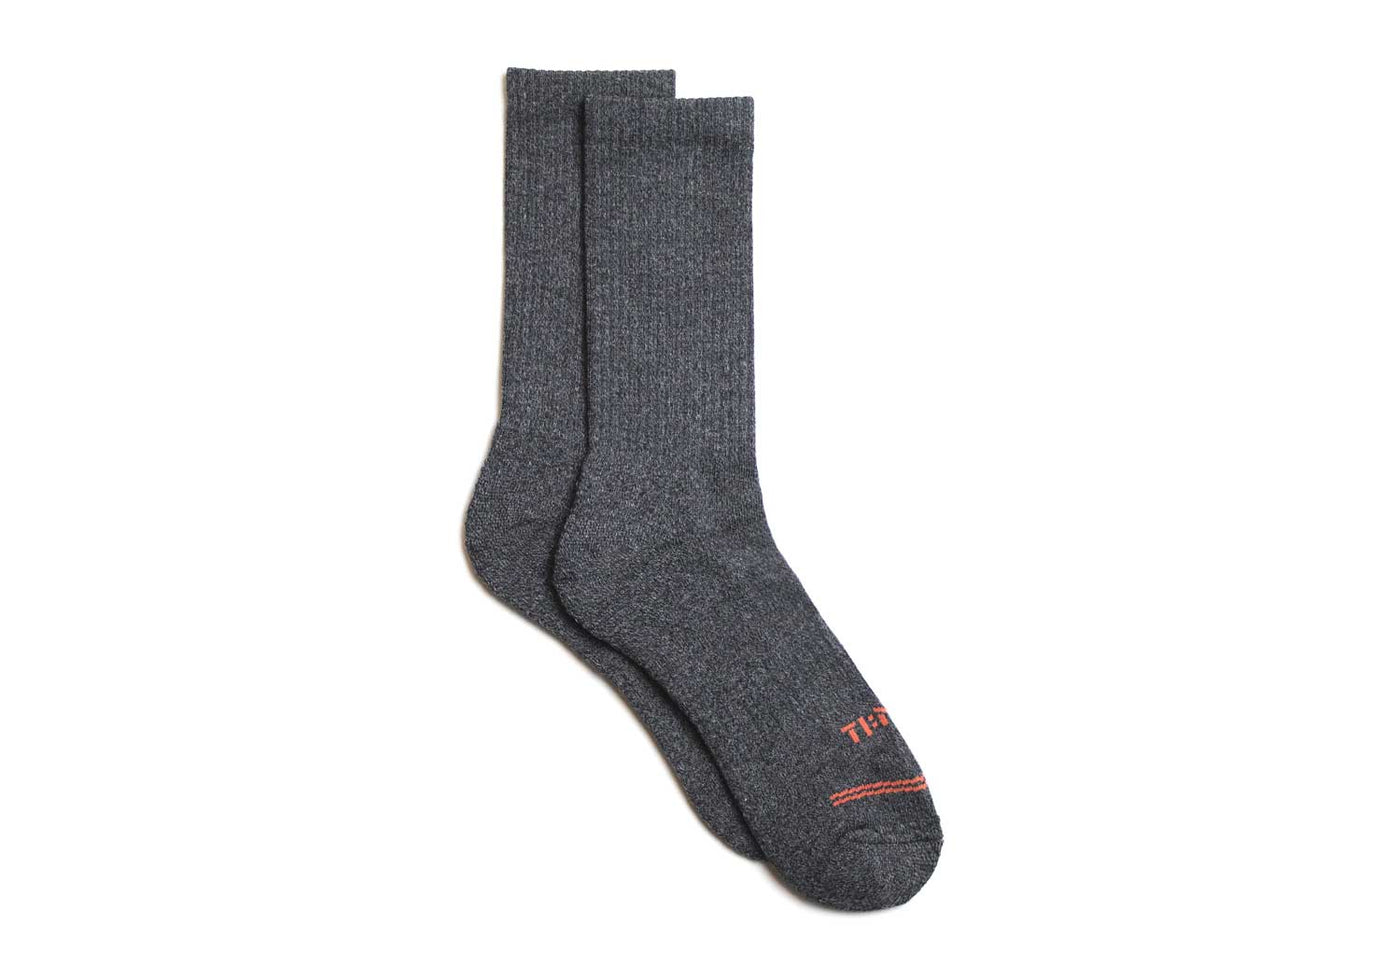 TIME Comfort Socks (unisex) - Calf Socks - 1 pair / Small by TIME Slippers